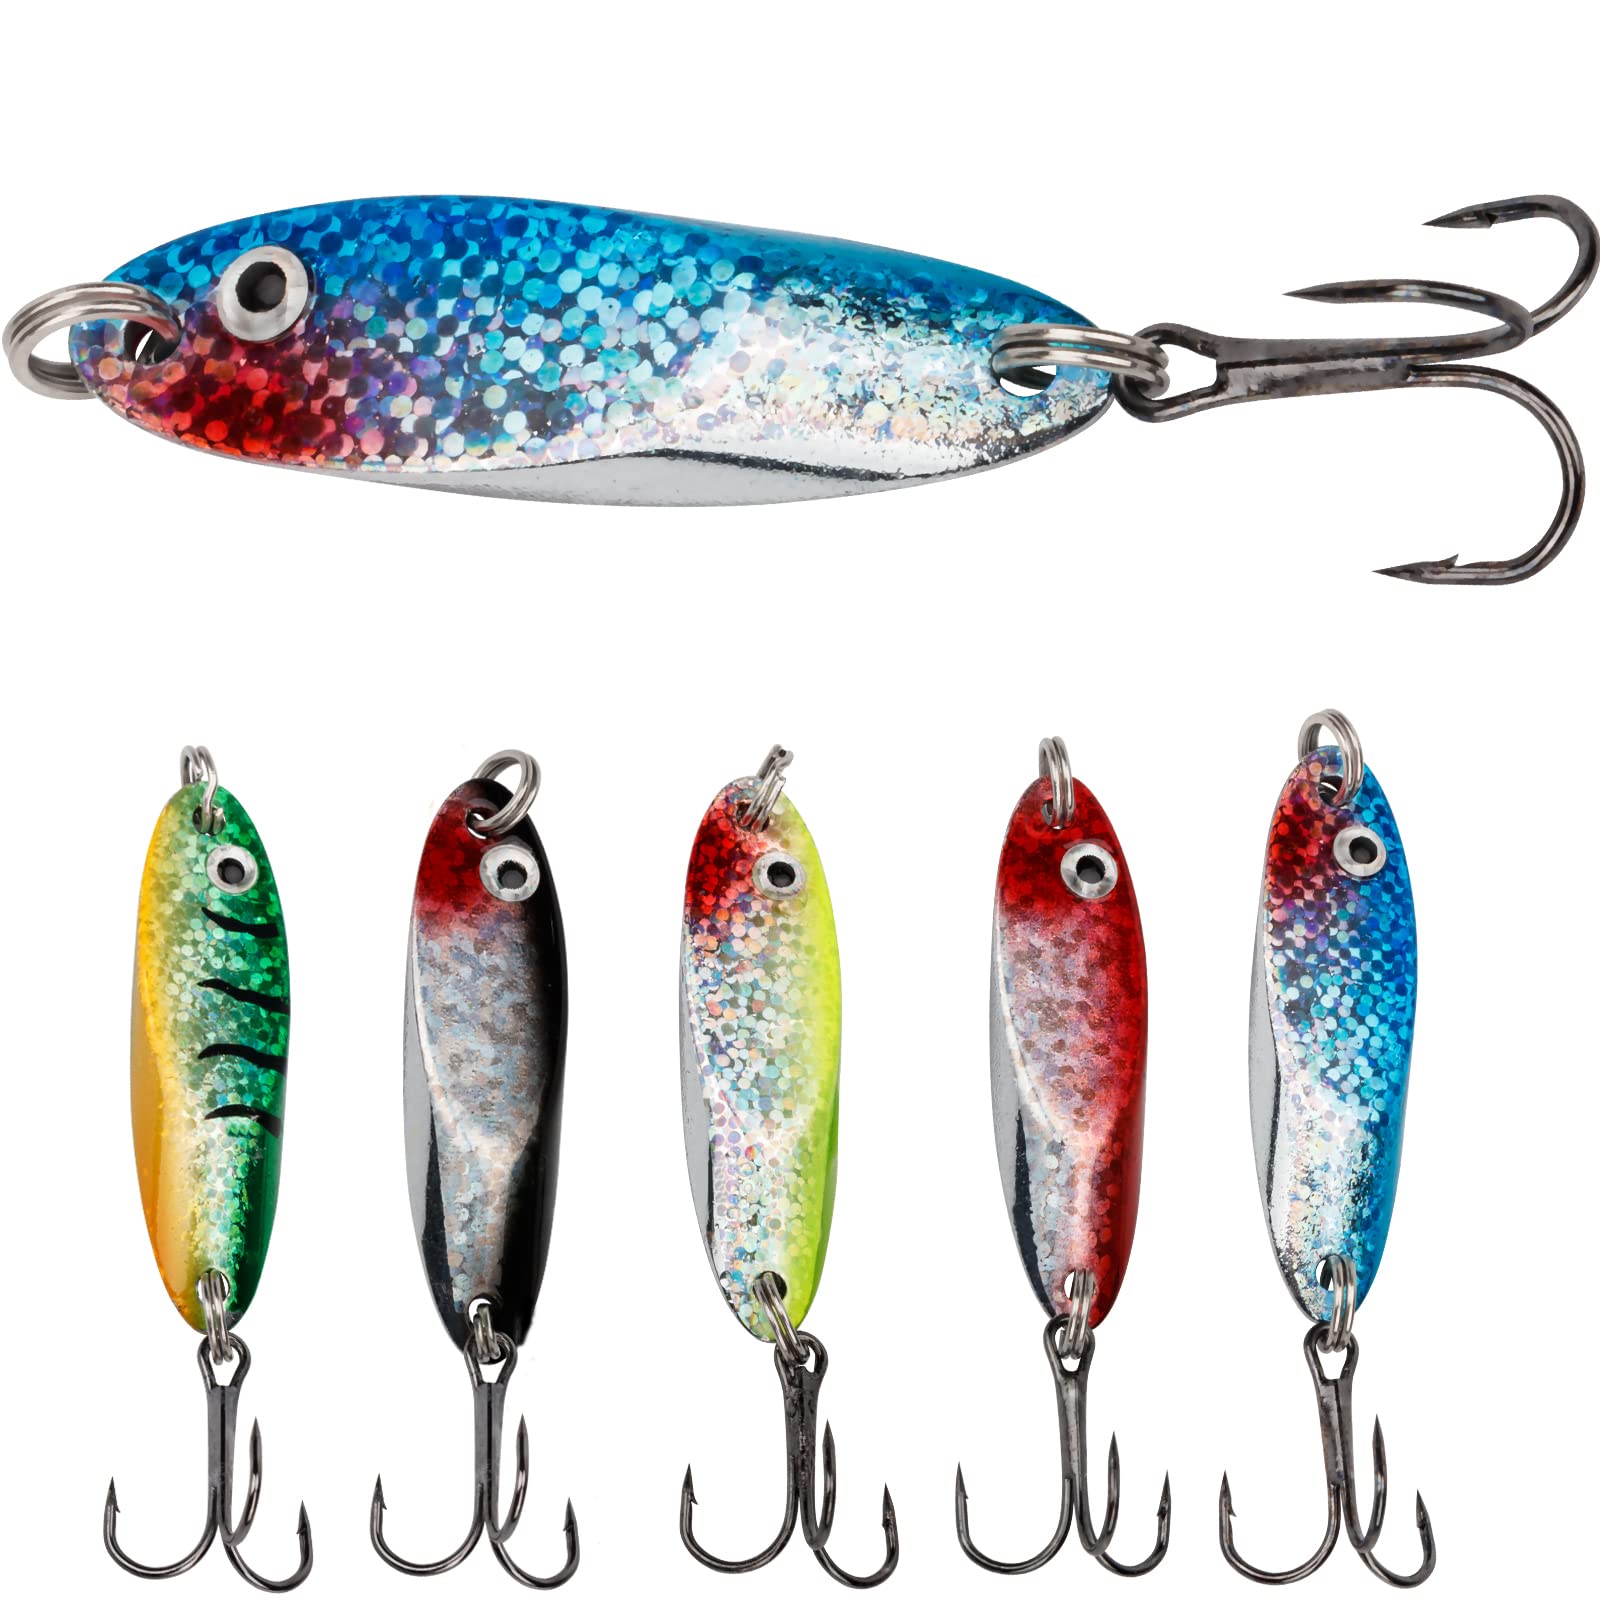  Lunkerhunt Micro Spoon Fishing Lures (4-Pack), Spoon Fishing  Bait Saltwater for Bass Fishing and Trout